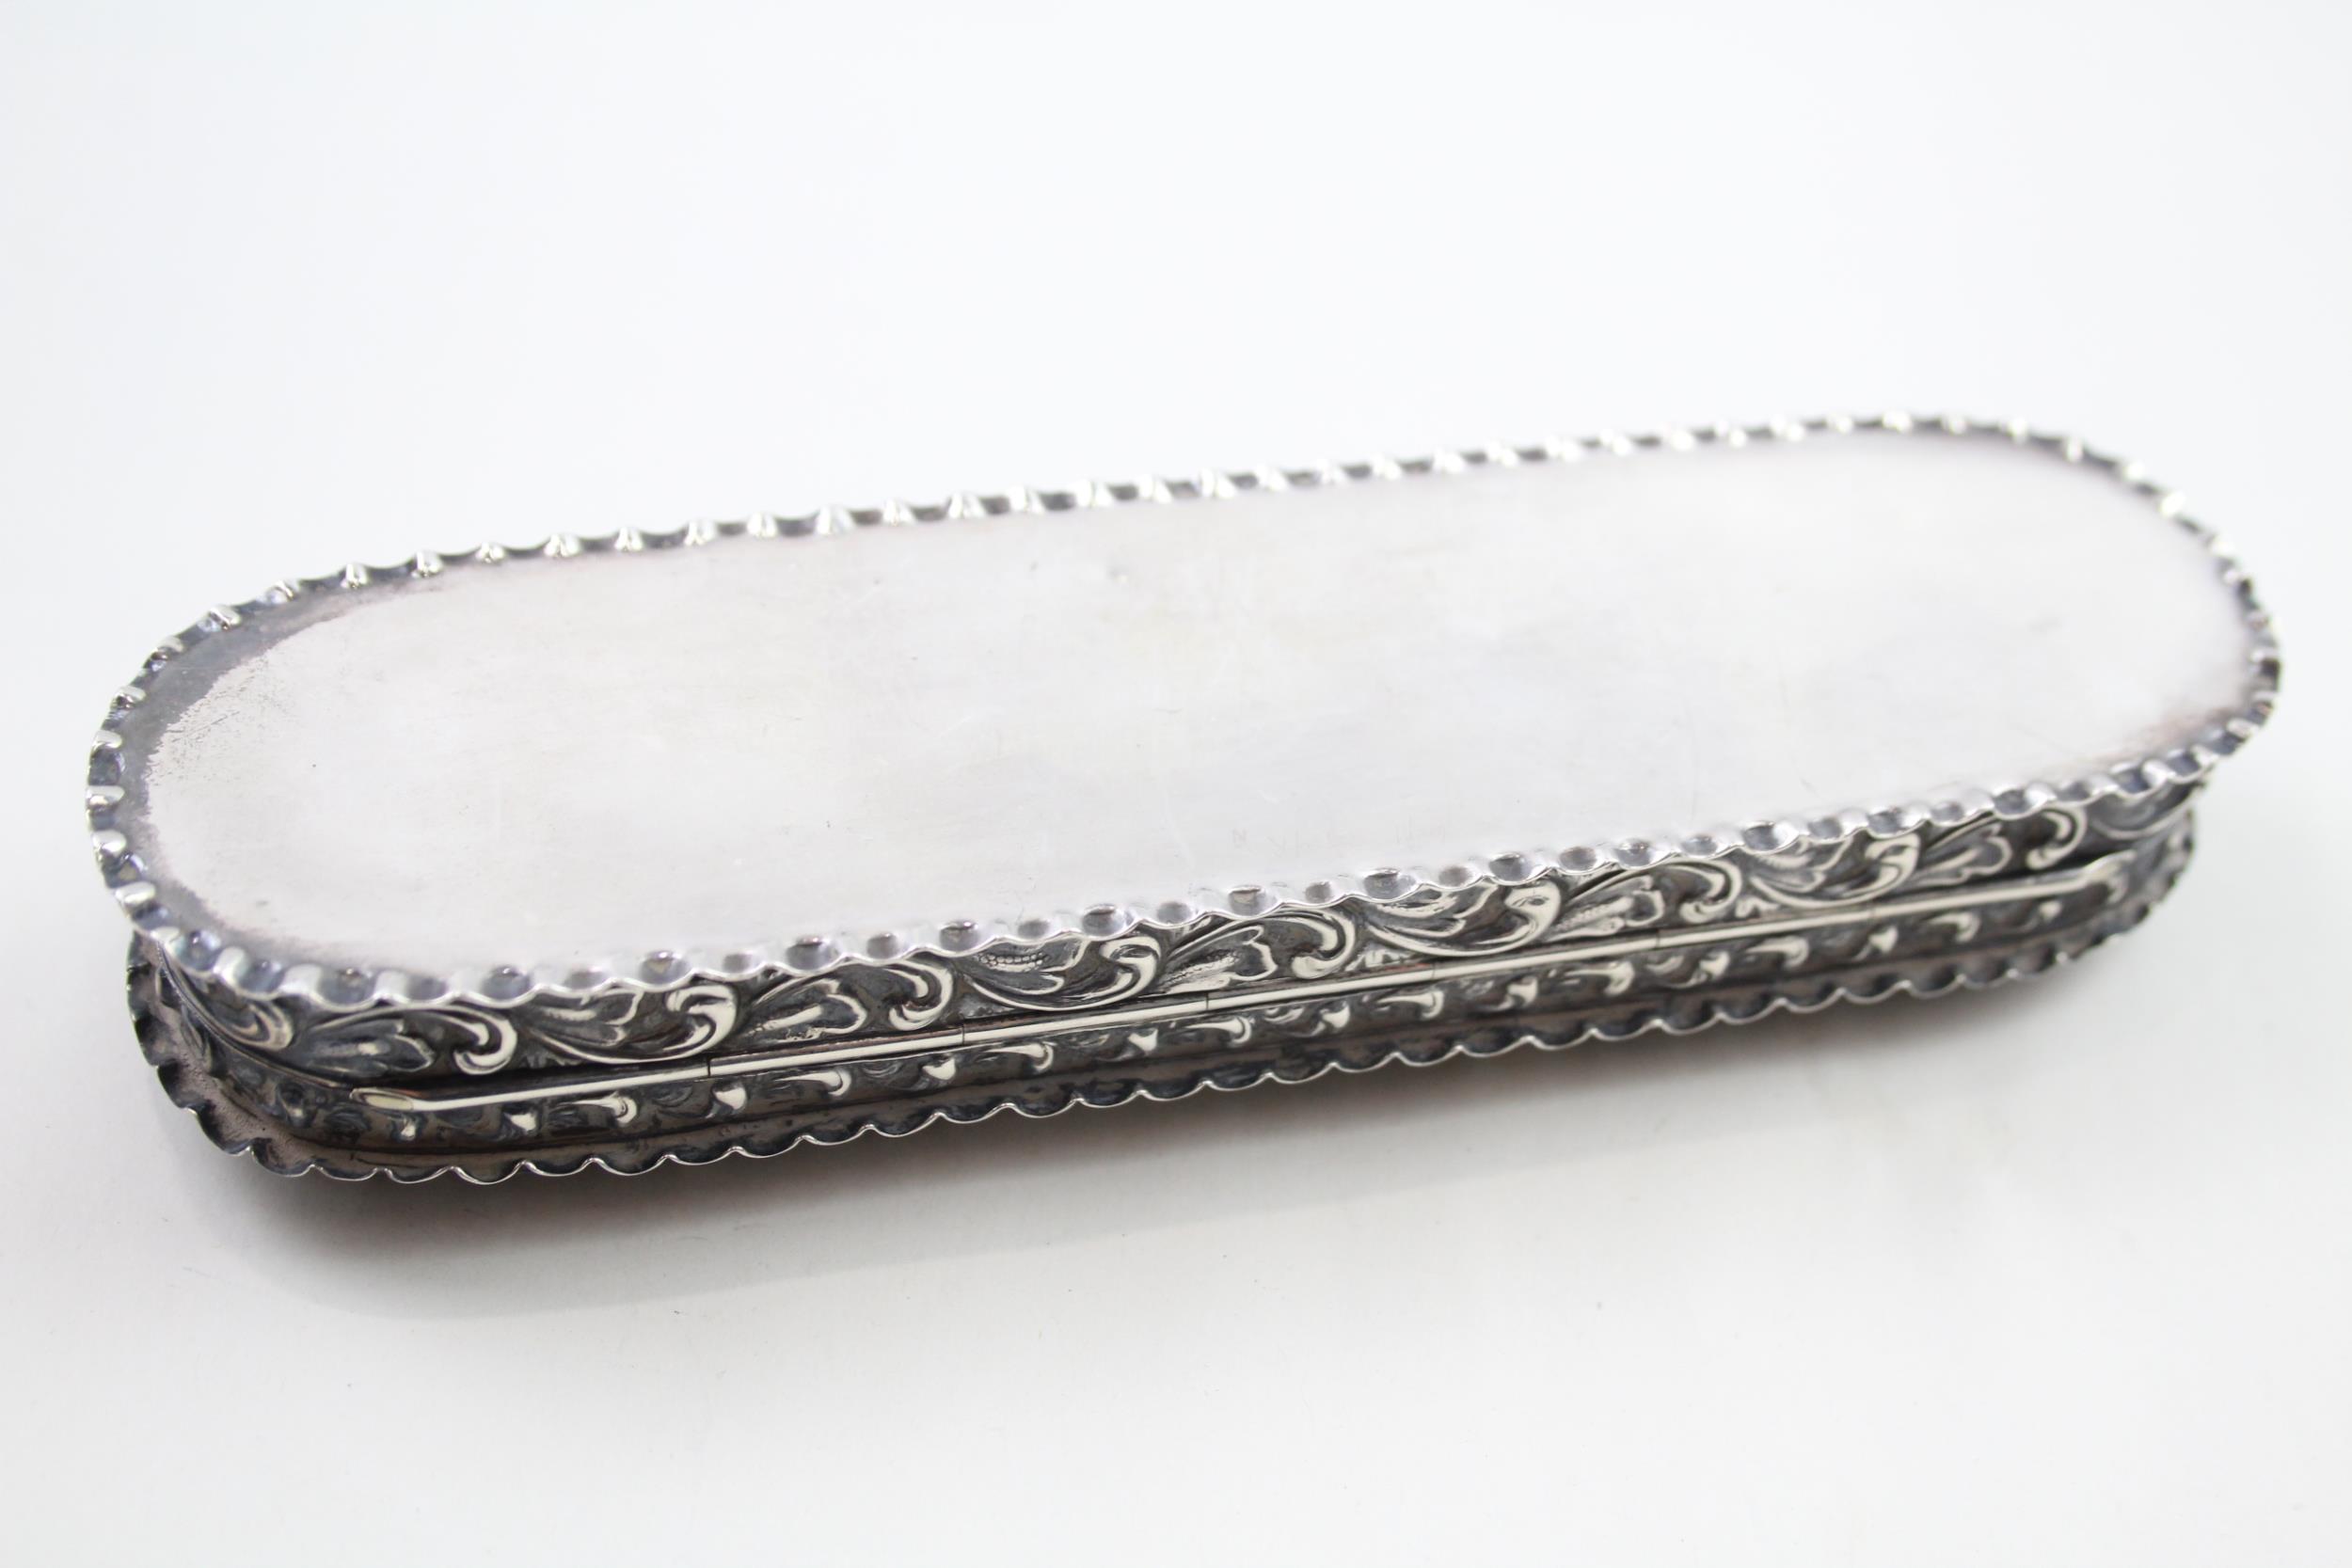 Antique Edwardian 1902 Chester Sterling Silver Long Trinket / Jewellery Box 129g - w/ Engraved - Image 6 of 8